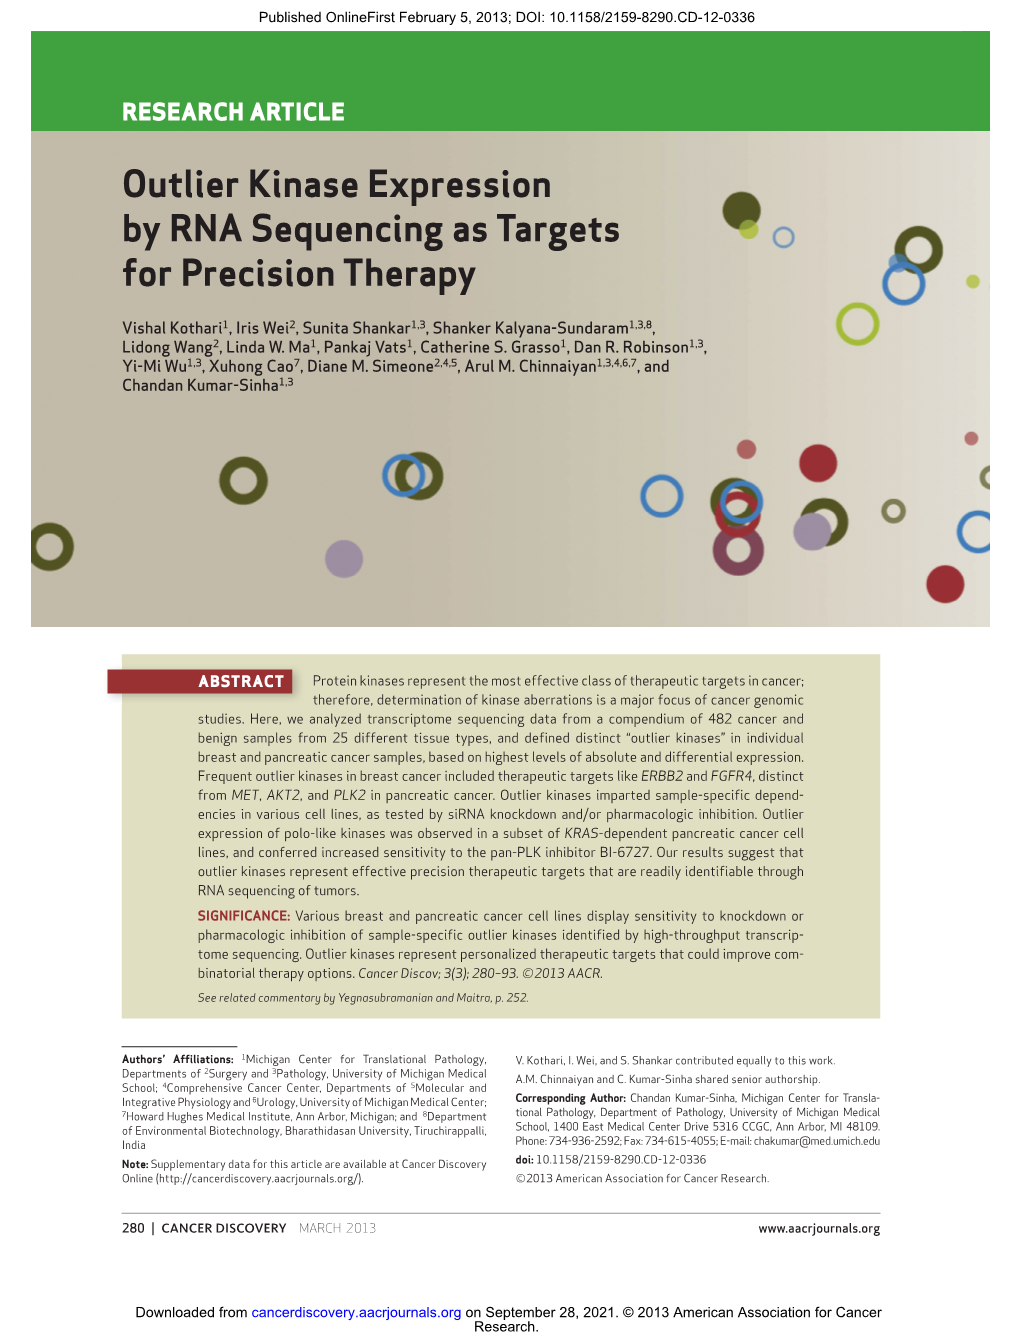 Outlier Kinase Expression by RNA Sequencing As Targets for Precision Therapy